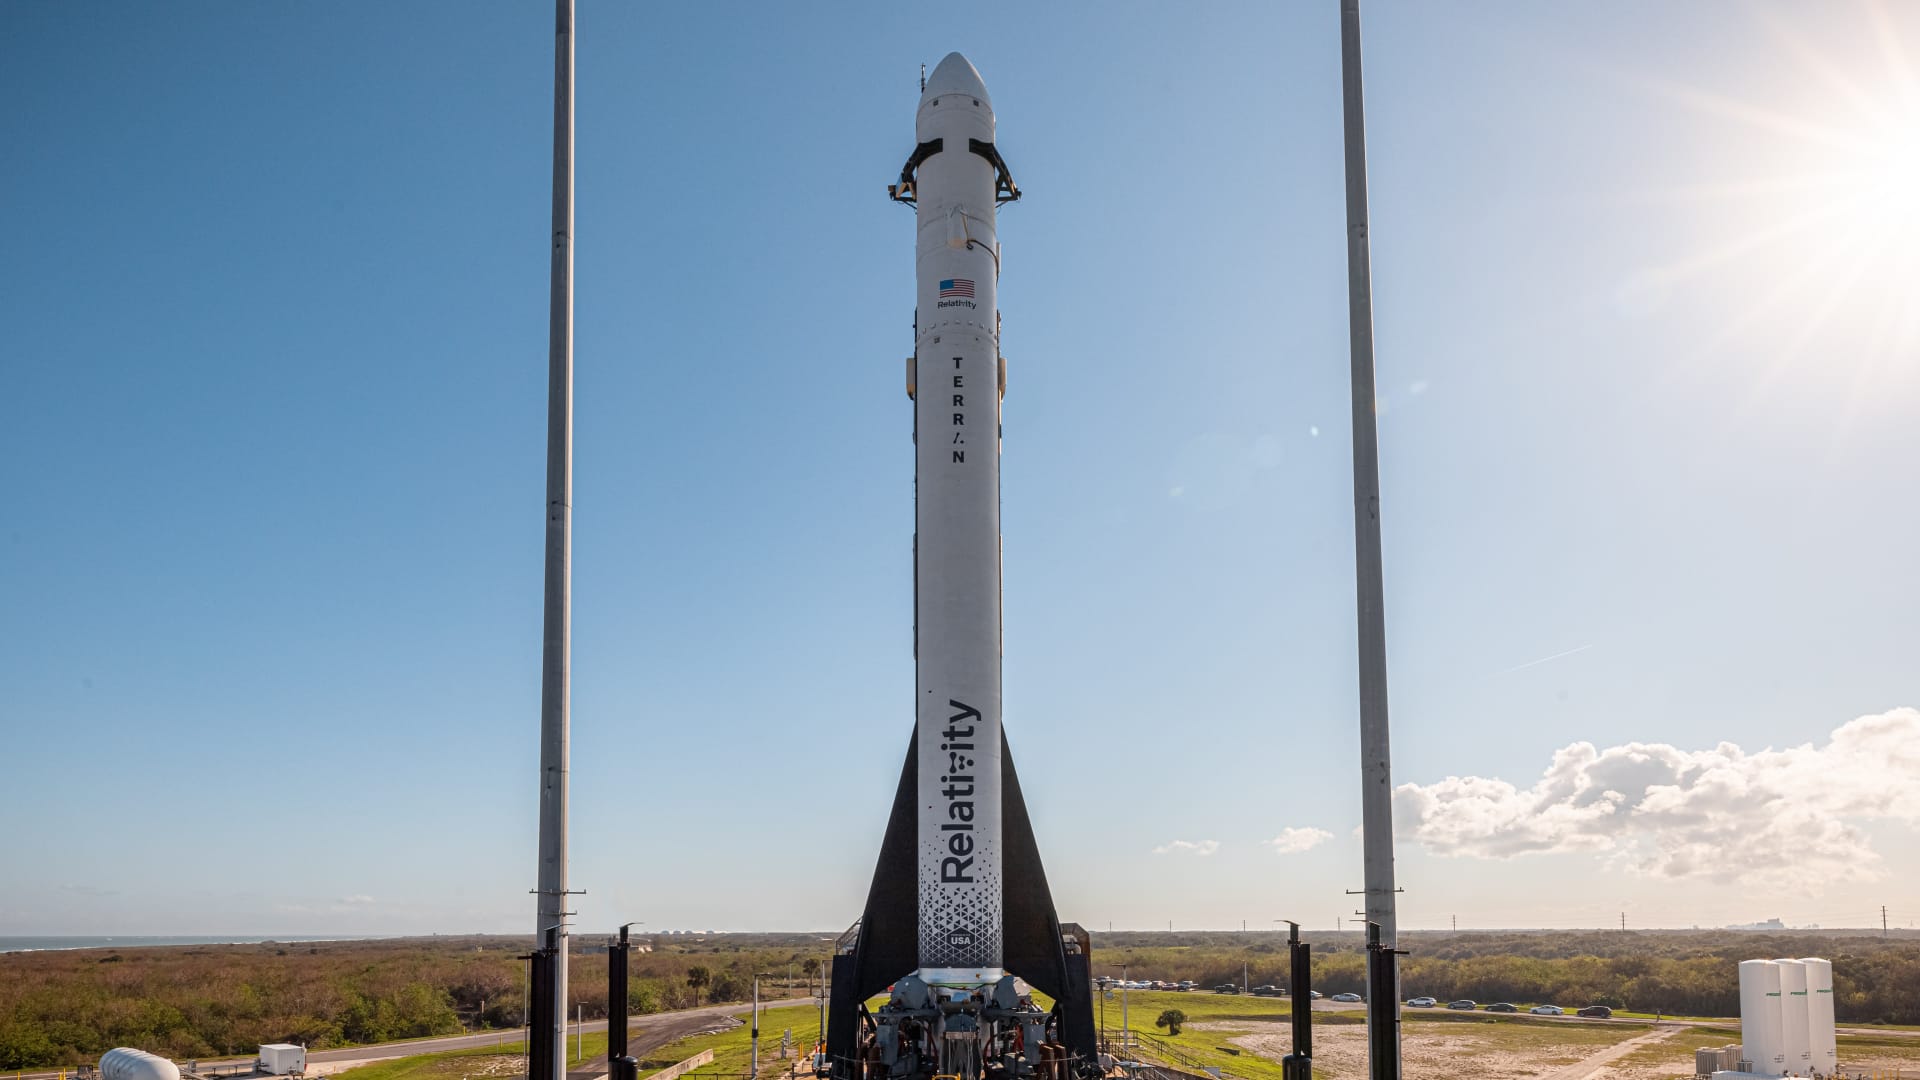 Watch Relativity attempt the first launch of its 3D-printed rocket Terran 1